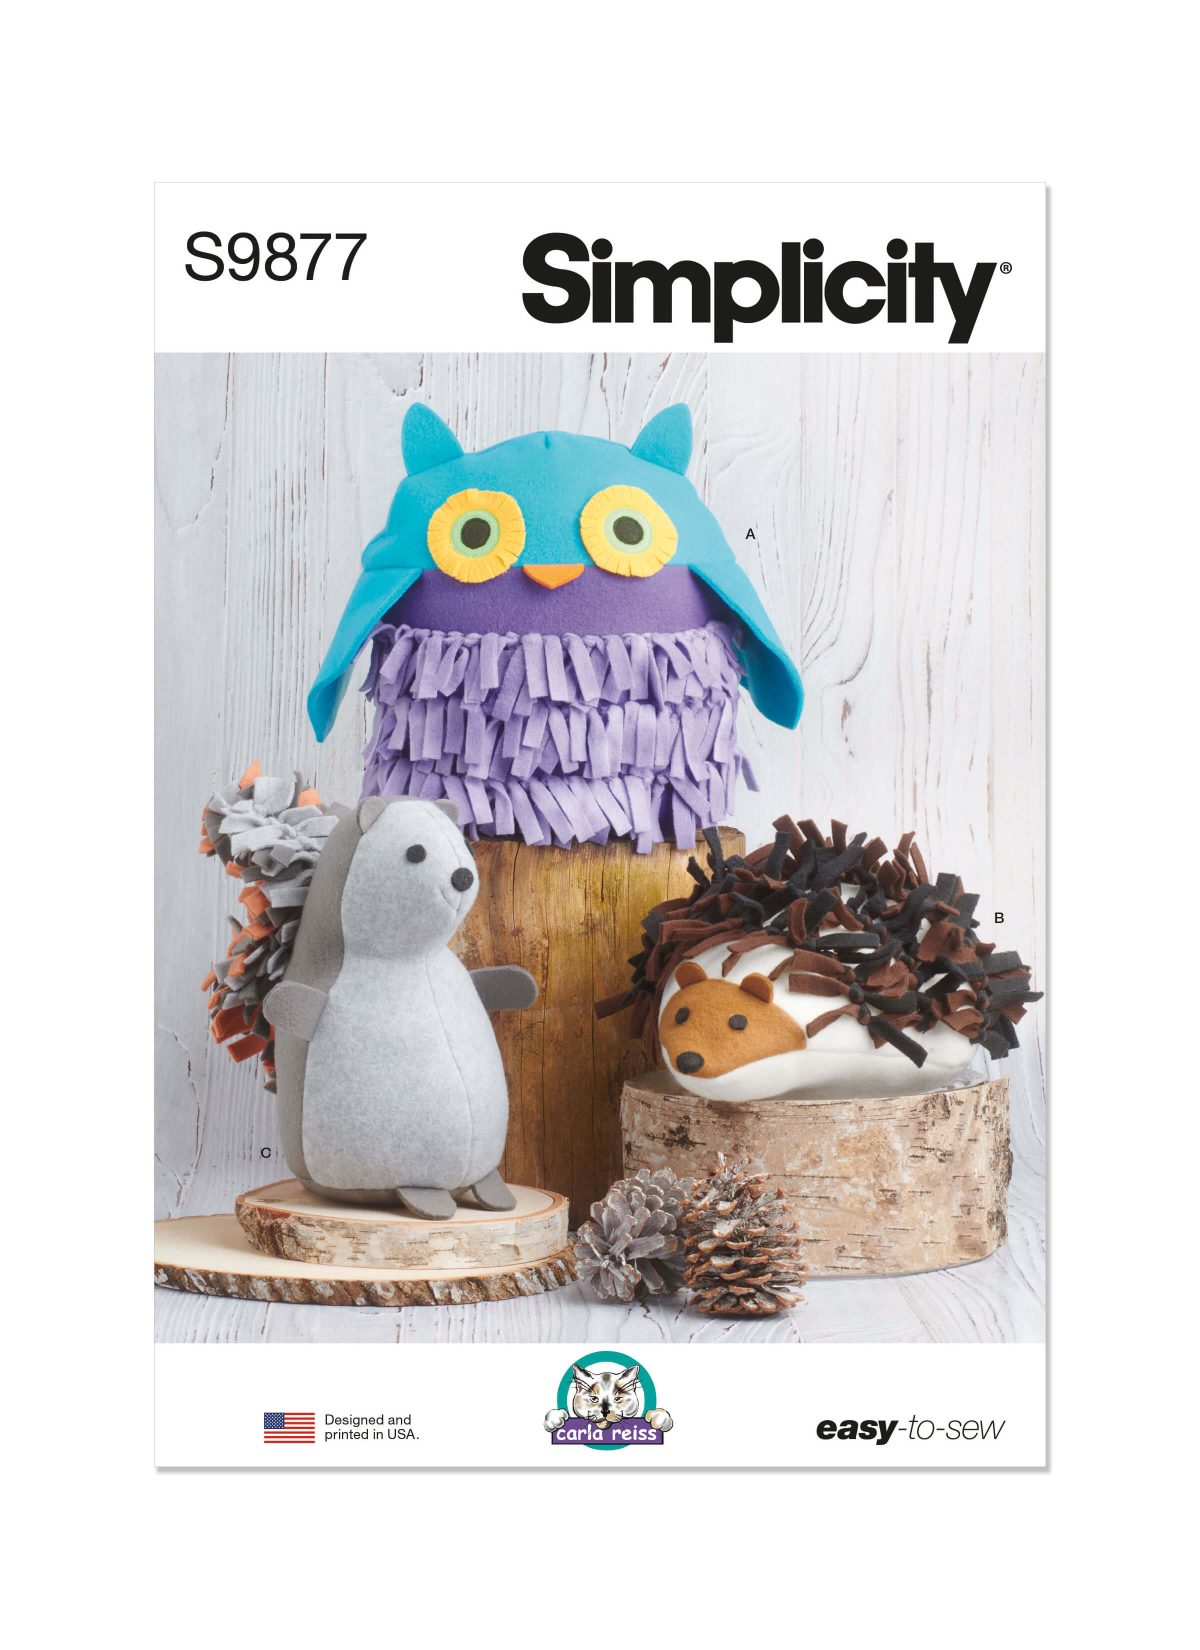 Simplicity Sewing Pattern S9877 Plush Animals by Carla Reiss Design